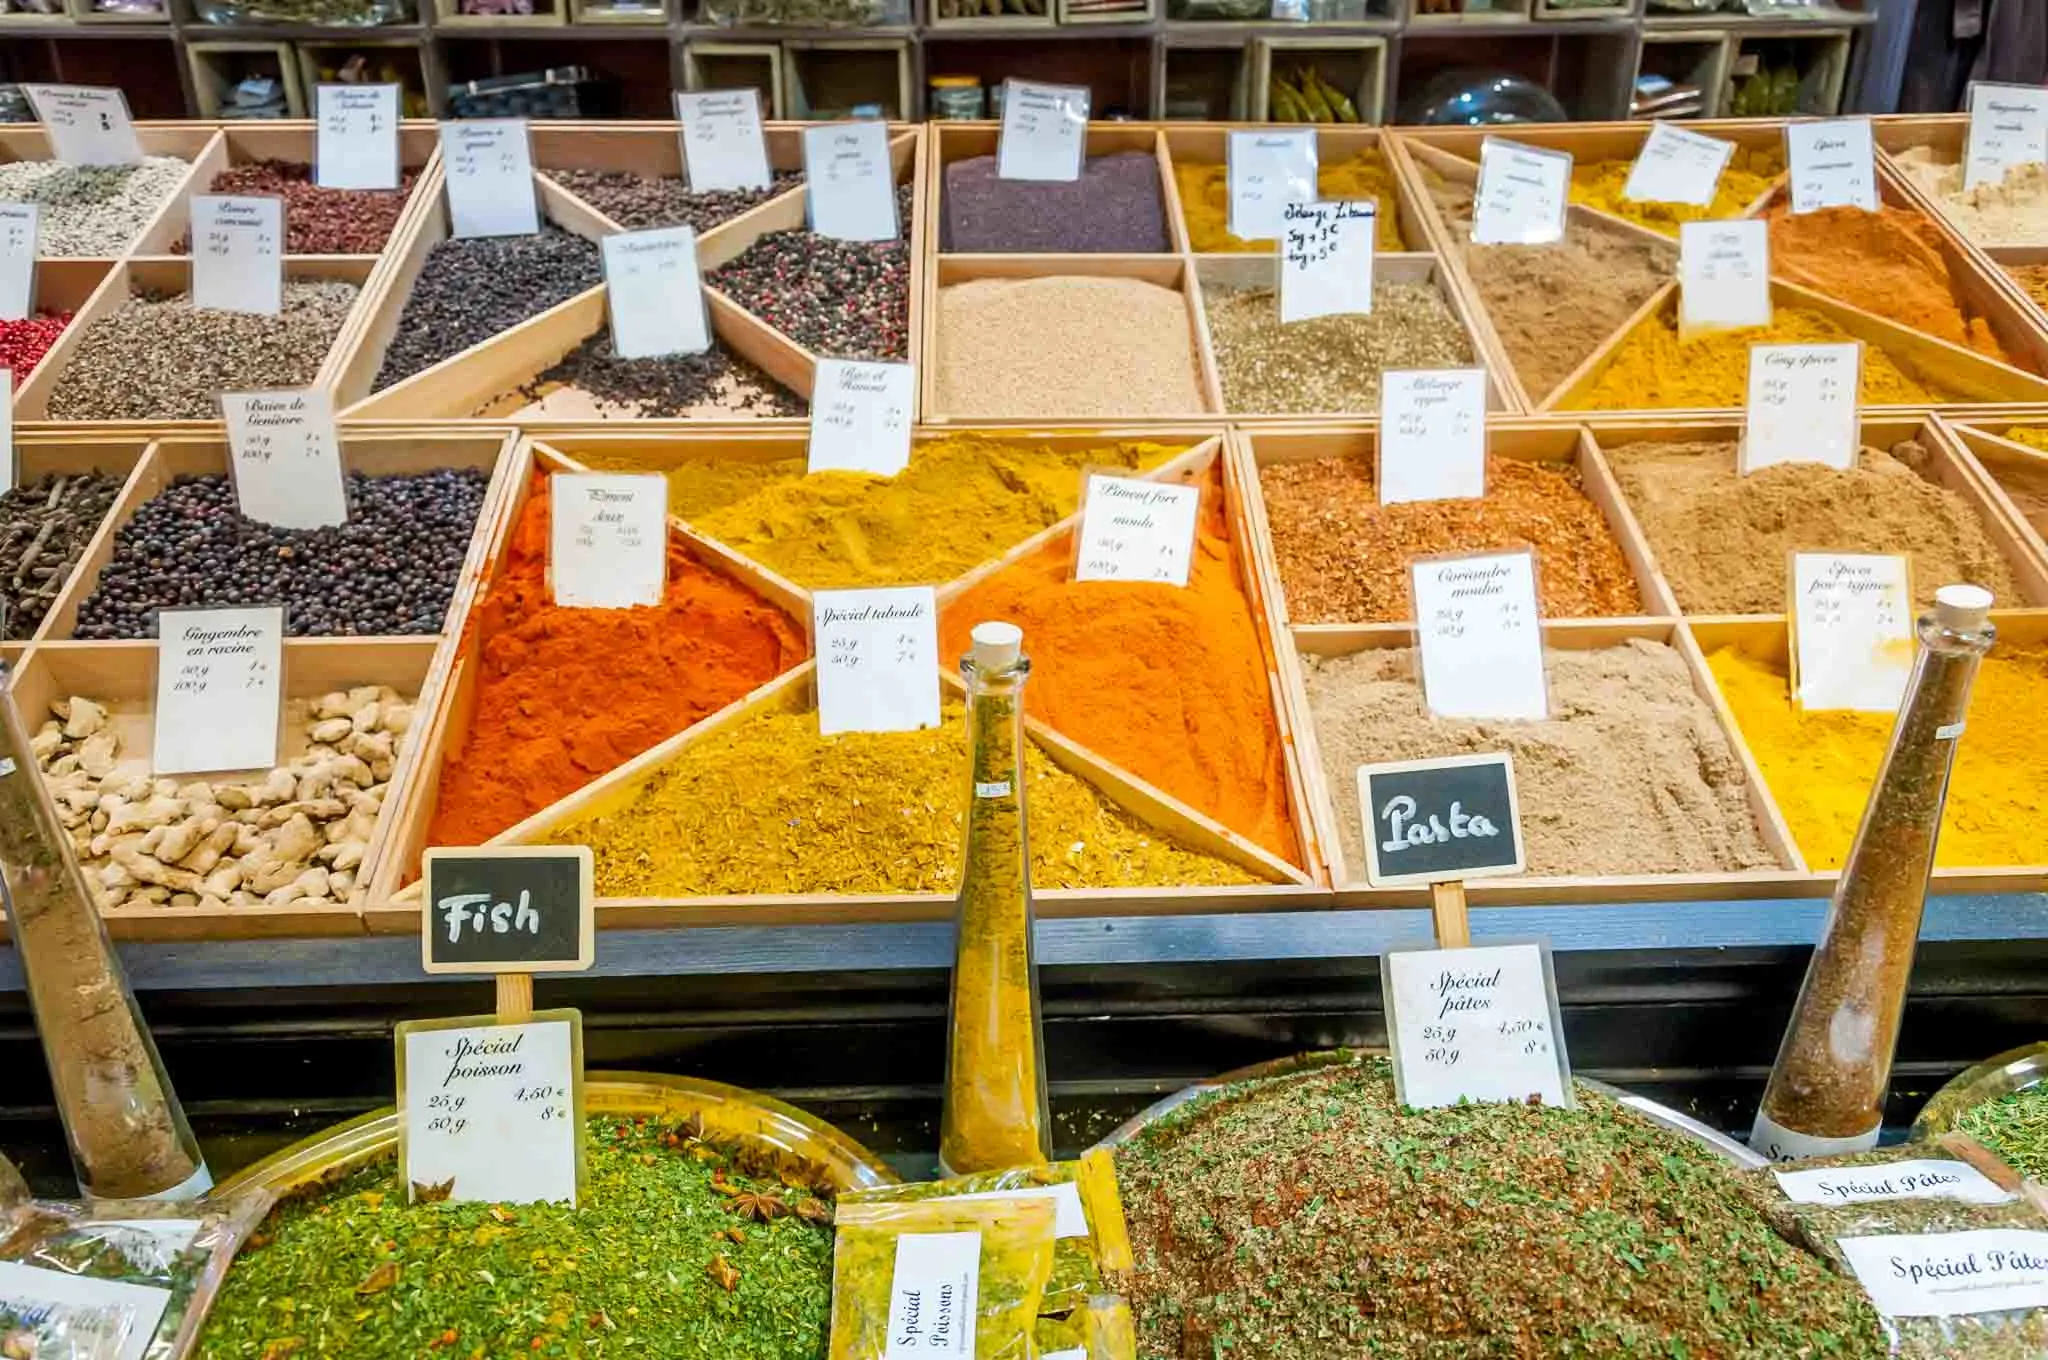 Spices for sale at the Les Halles market.